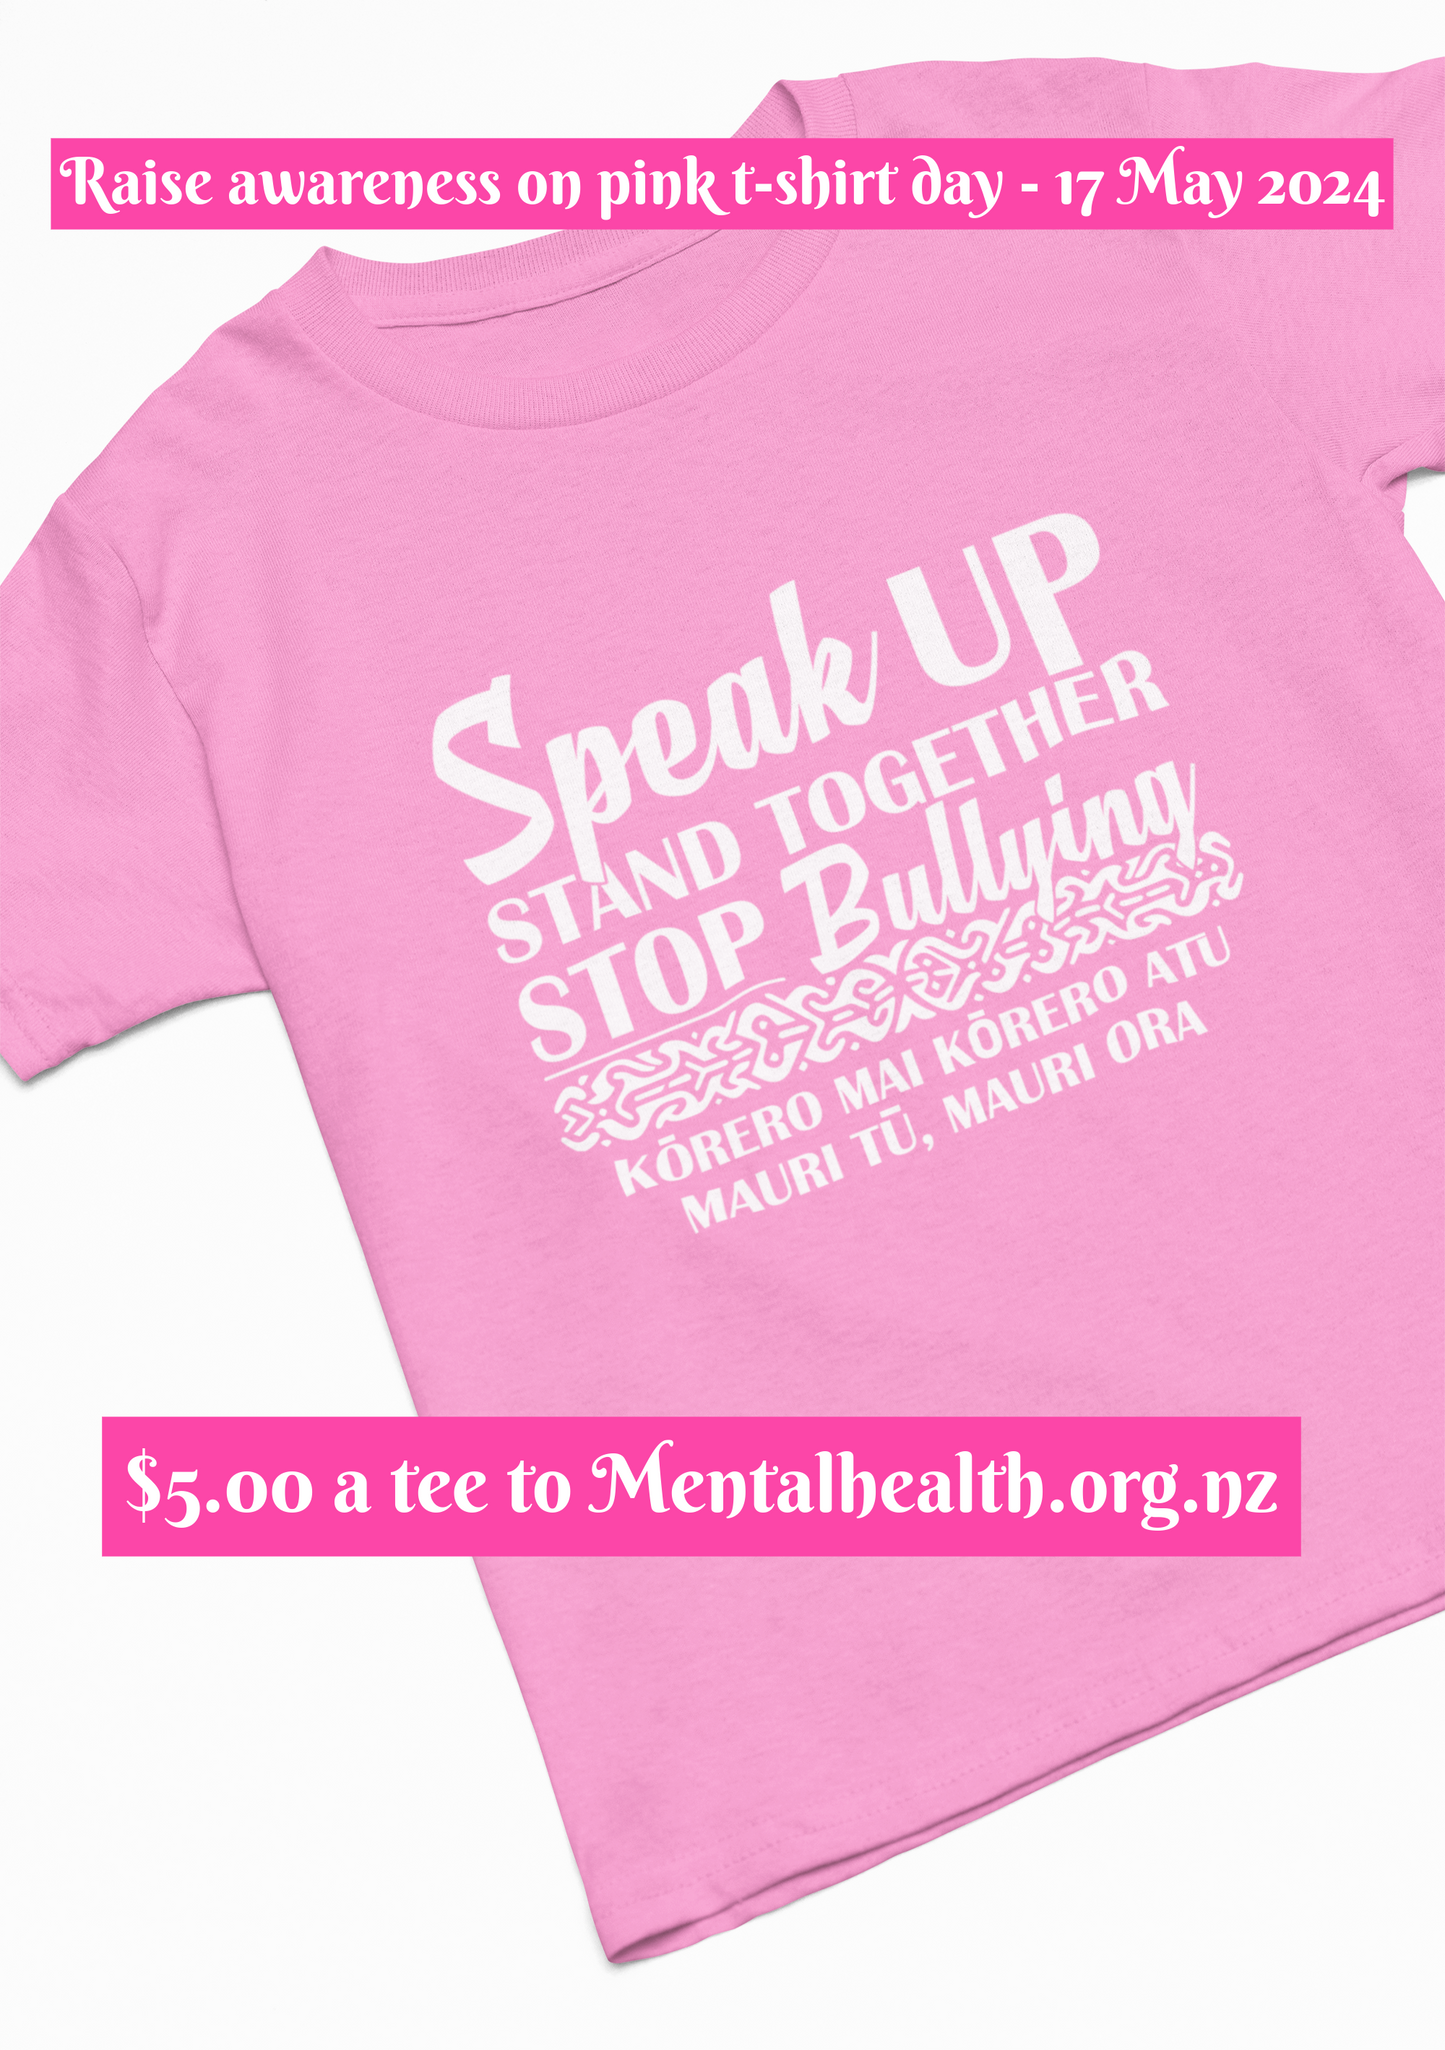 Pink T-Shirt Day - Speak Up, Stand Together, Stop Bullying